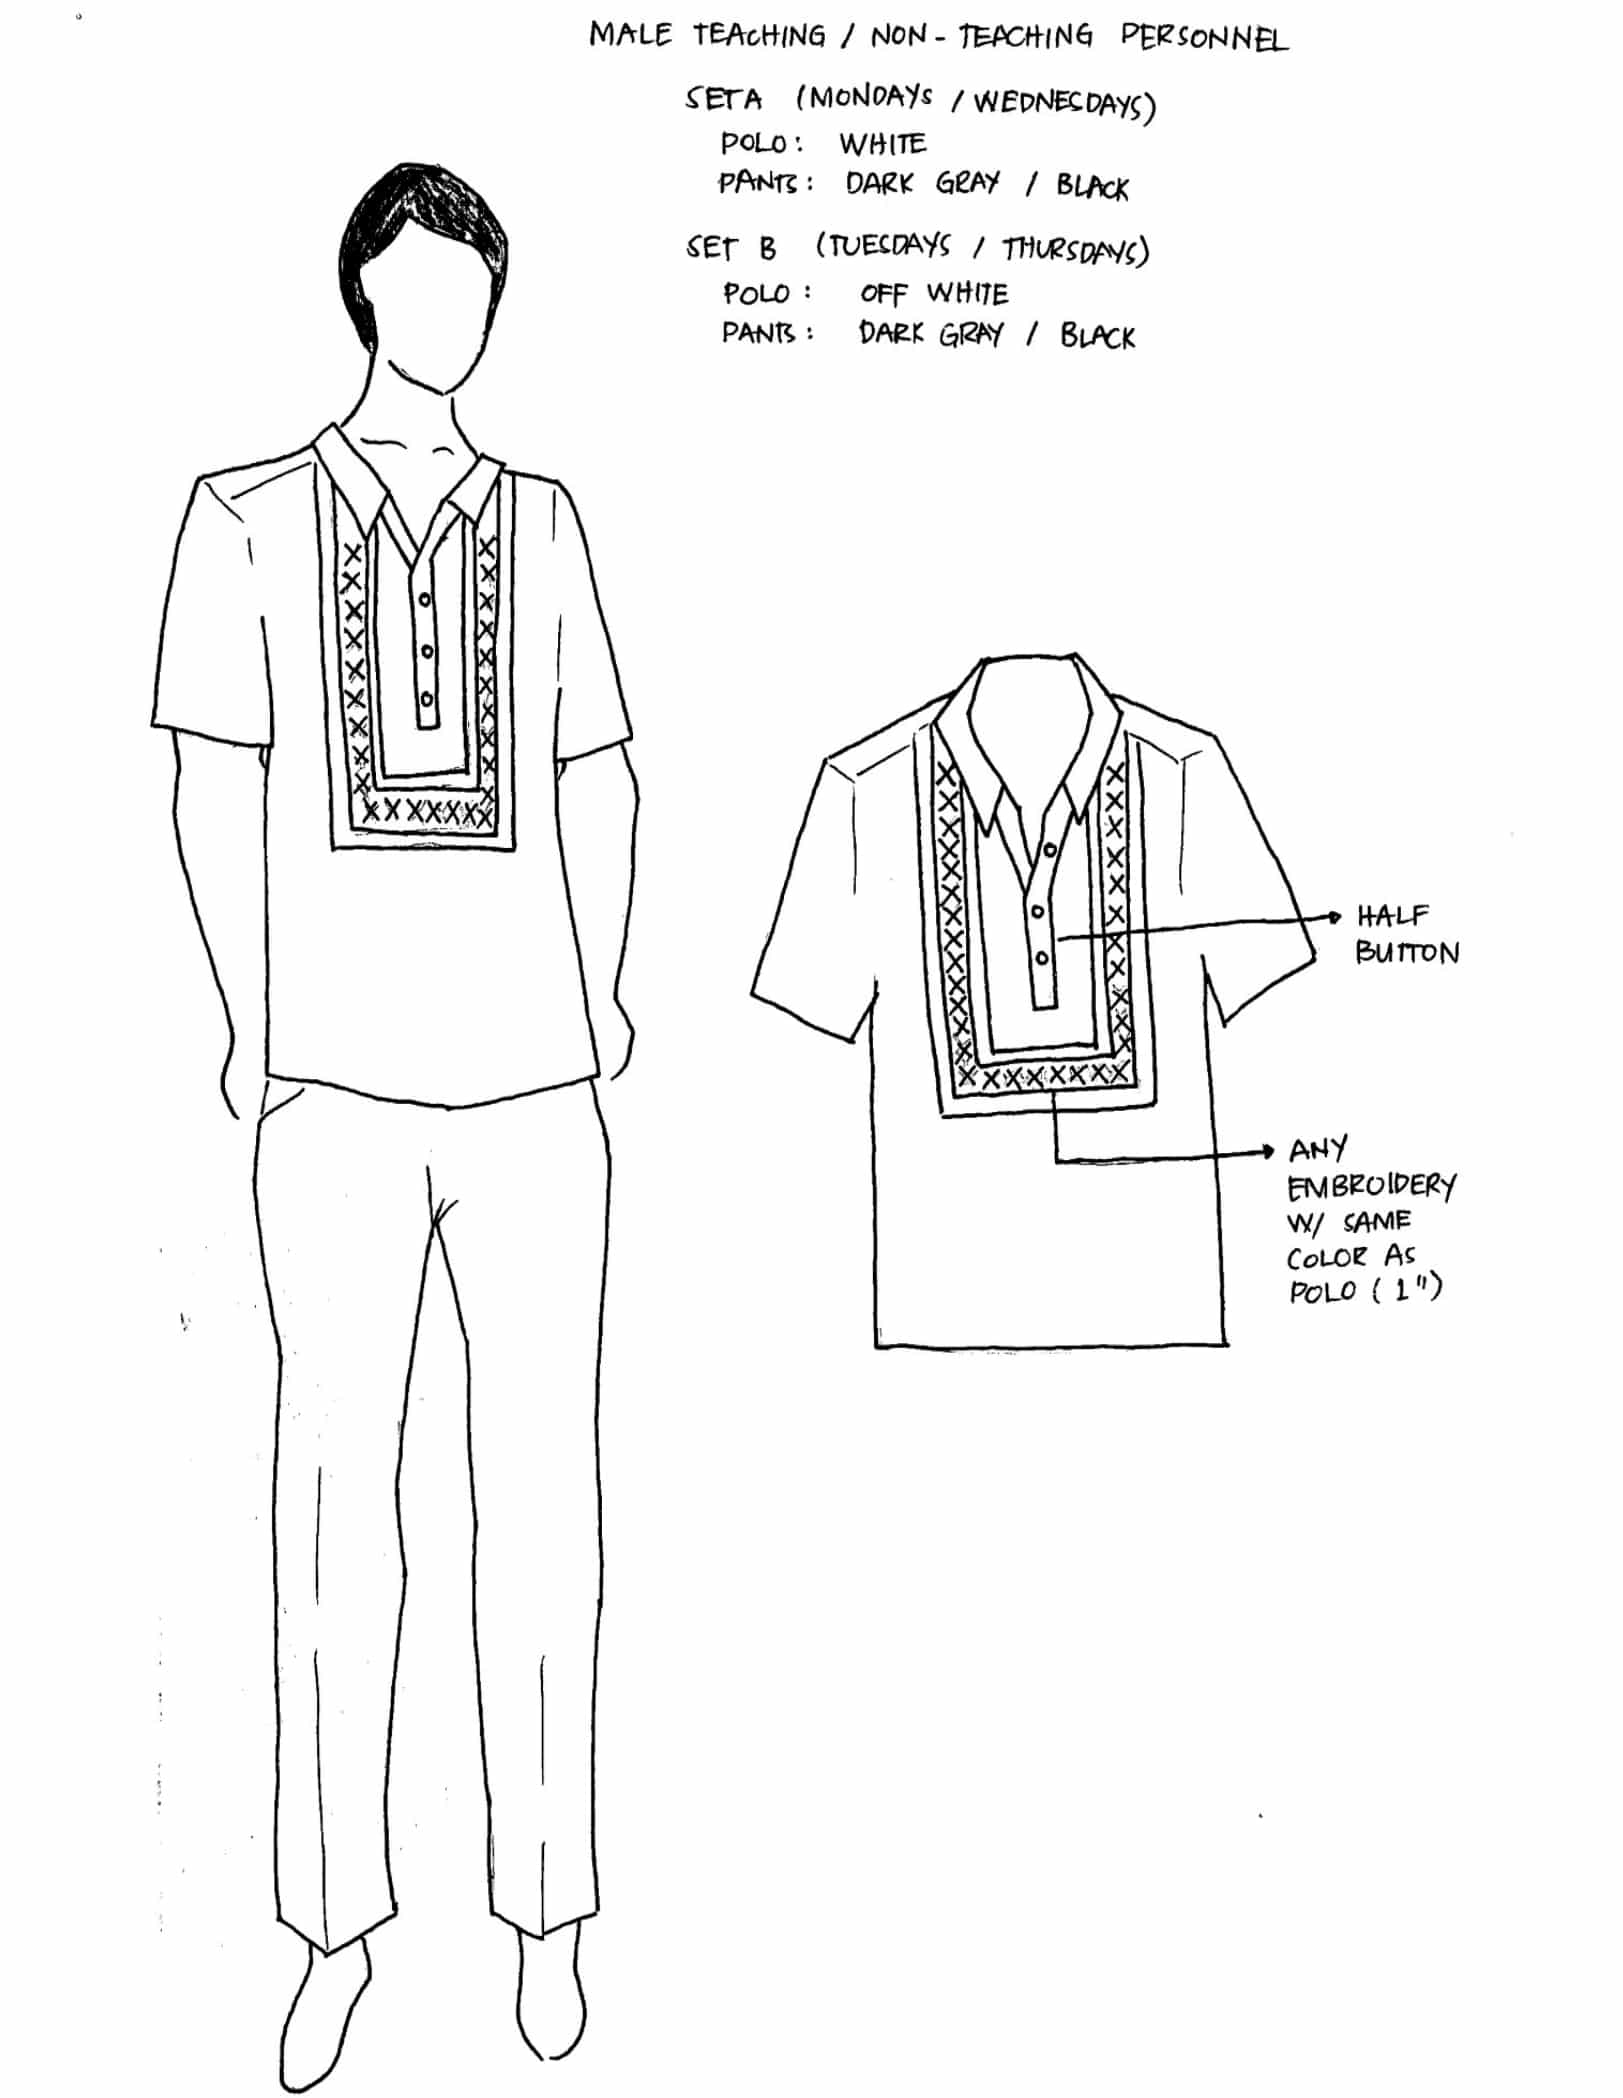 DepEd National Uniforms Male Teaching Non-Teaching Personnel